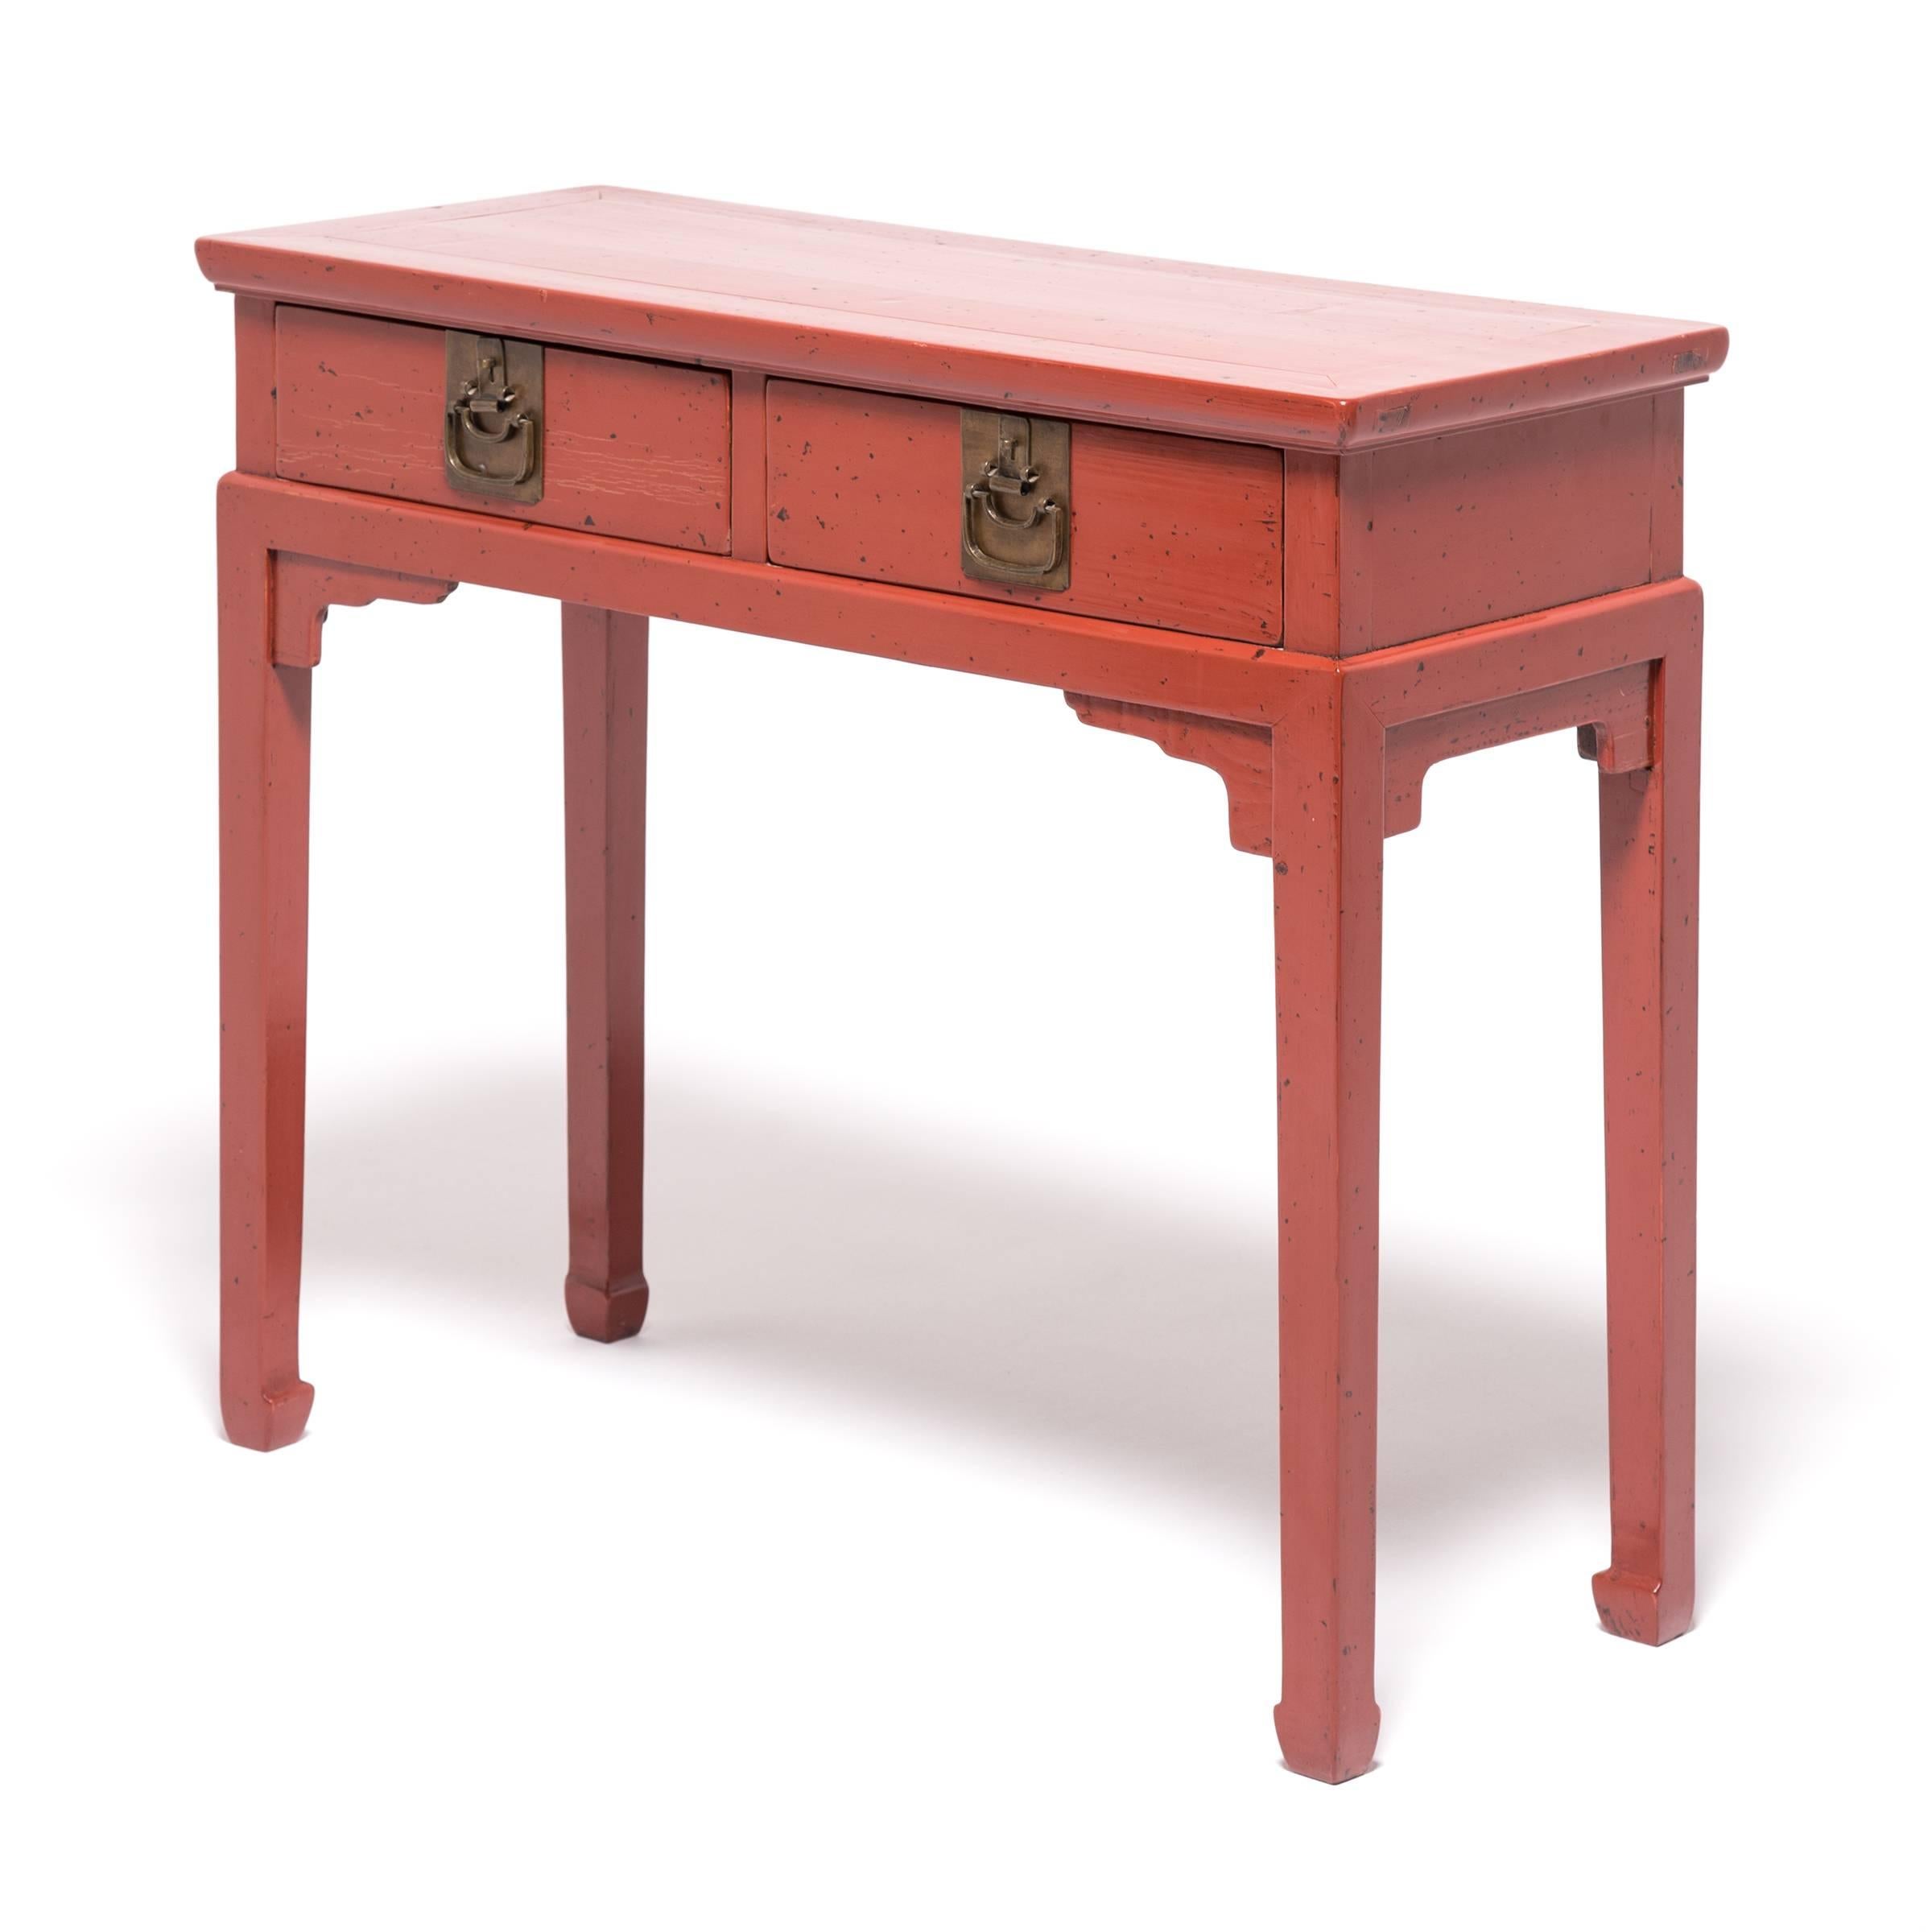 Lacquer not only enhances furniture with its gloss and vibrant color, the resin coating made from the sap of the Rhus verniciflua tree acts as a kind of natural coating, resistant to water, acid, and heat. Tinted red with the addition of cinnabar,